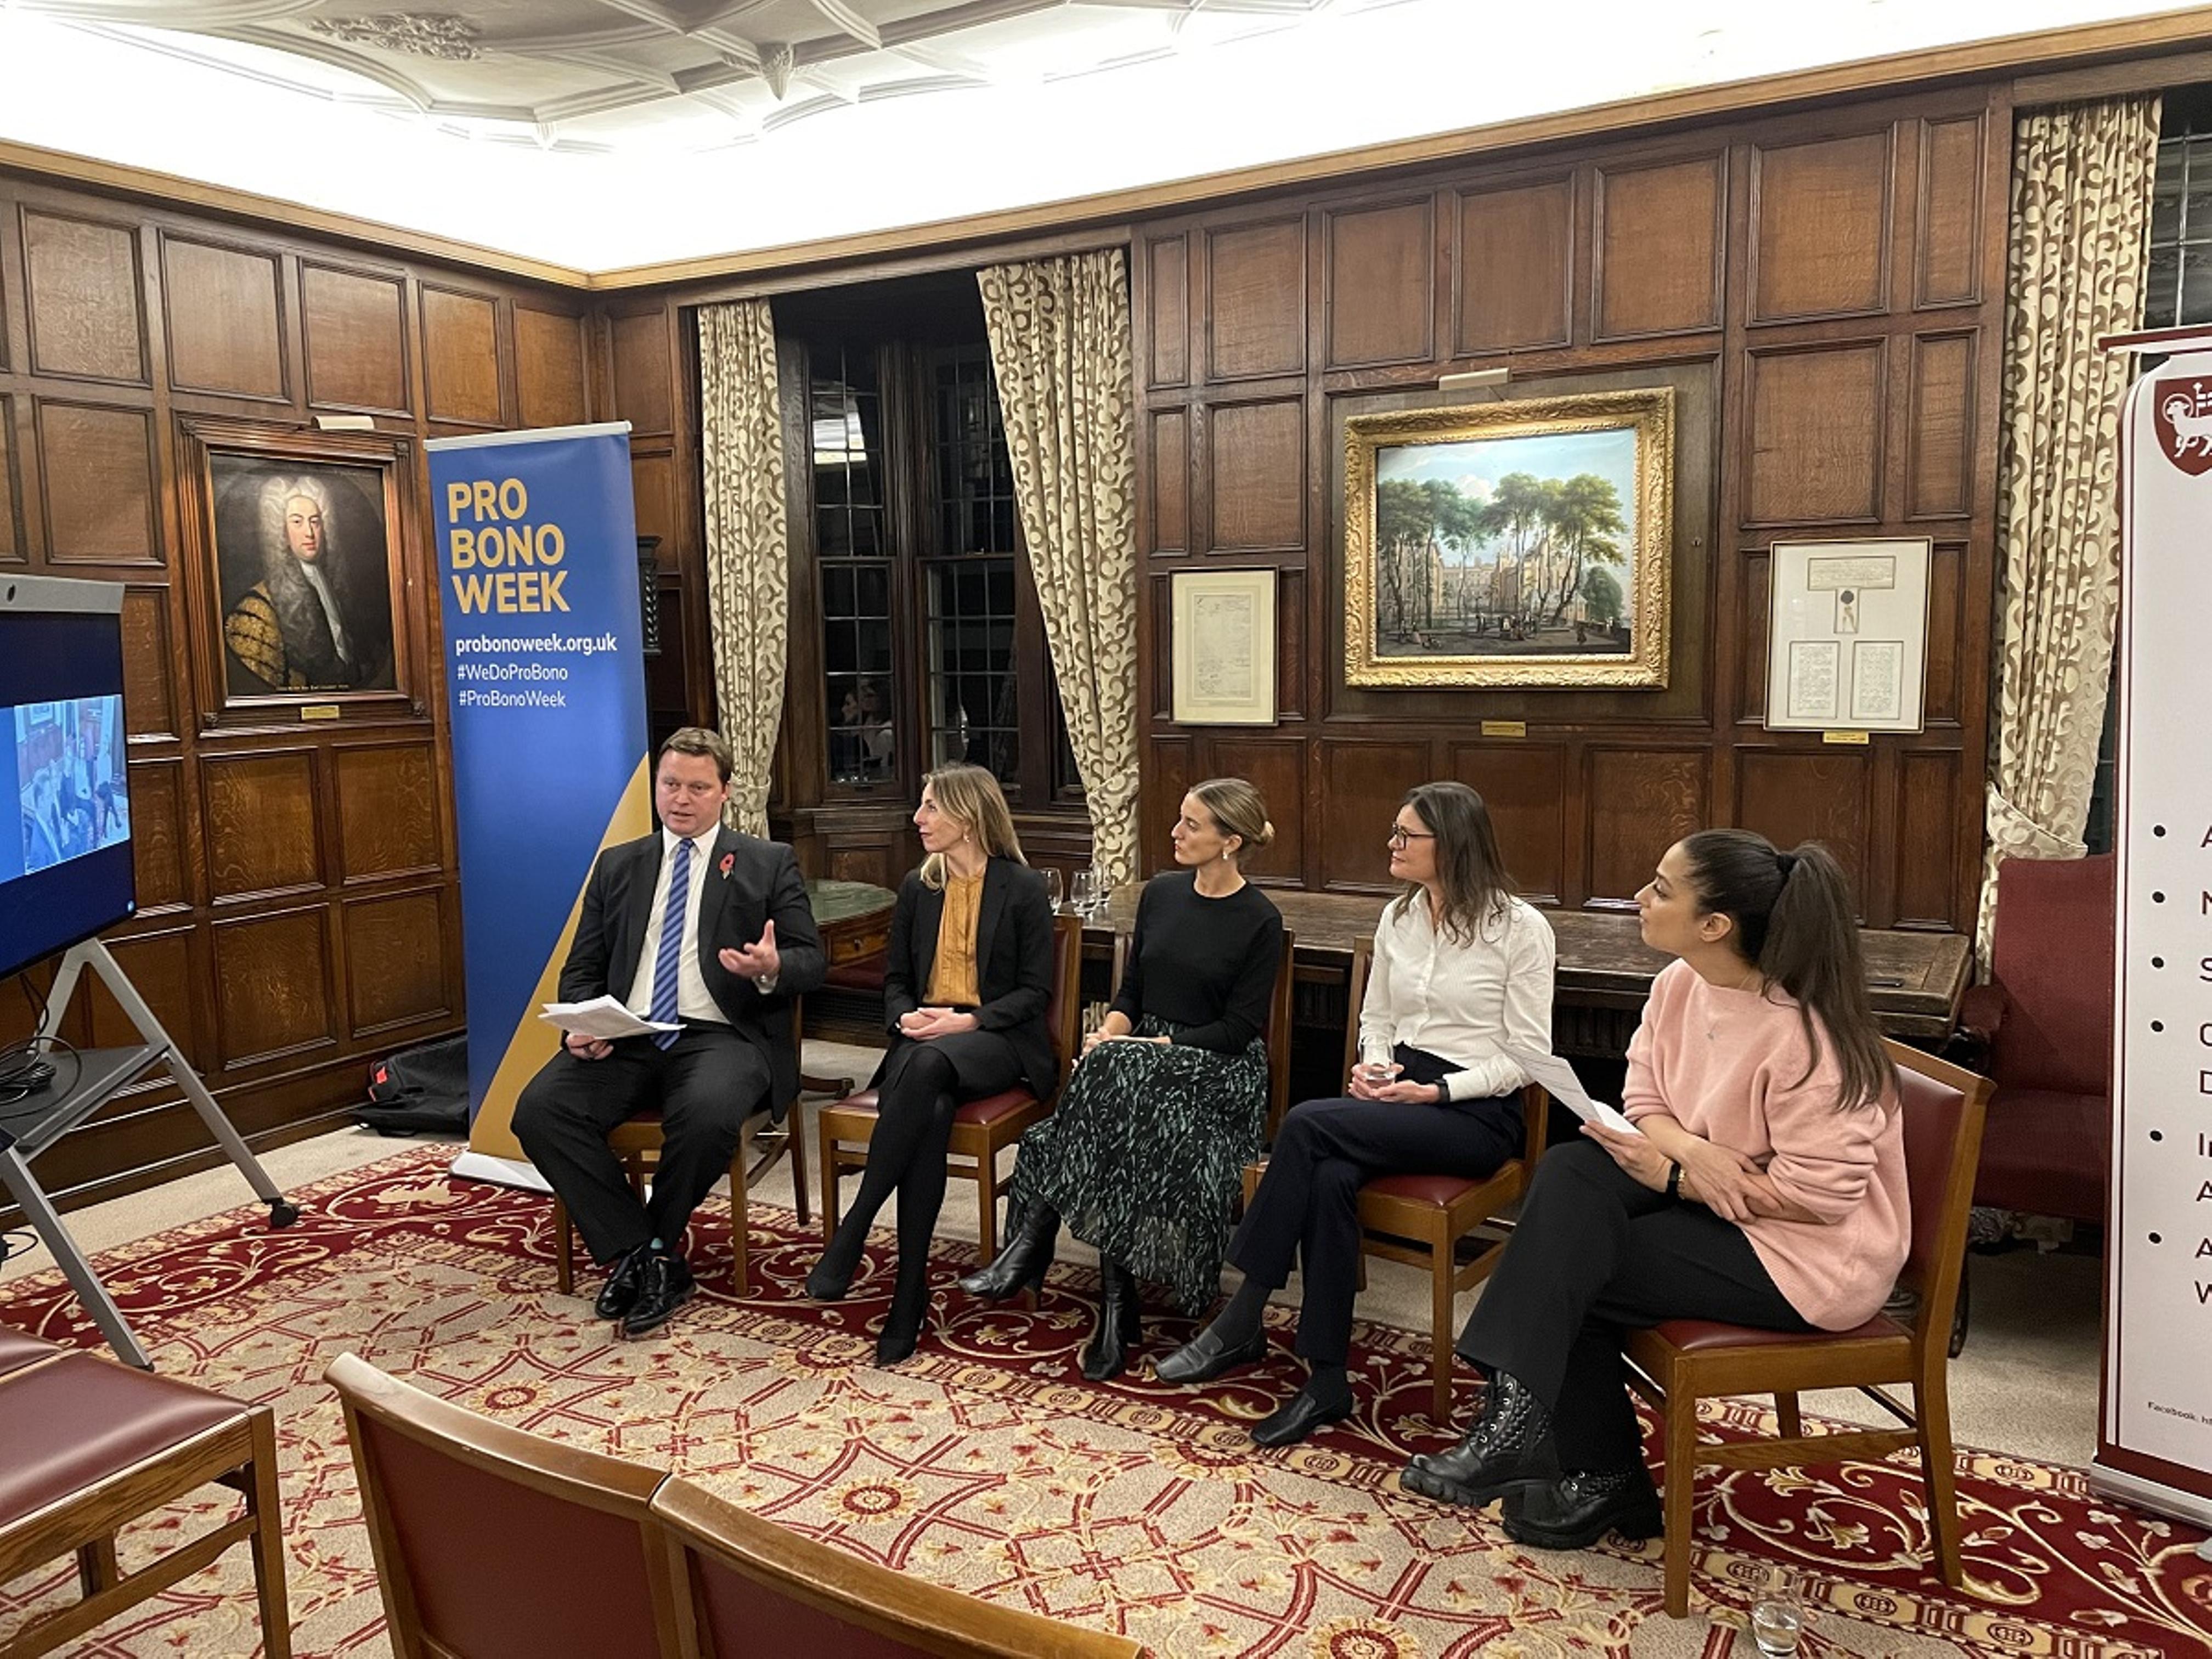 Michael spoke at the Pro Bono Week event ‘Lawyers stepping forward when it matters’, hosted at Middle Temple and with input from MTYBA, London Young Lawyers’ Group, Advocate, and the London Solicitors